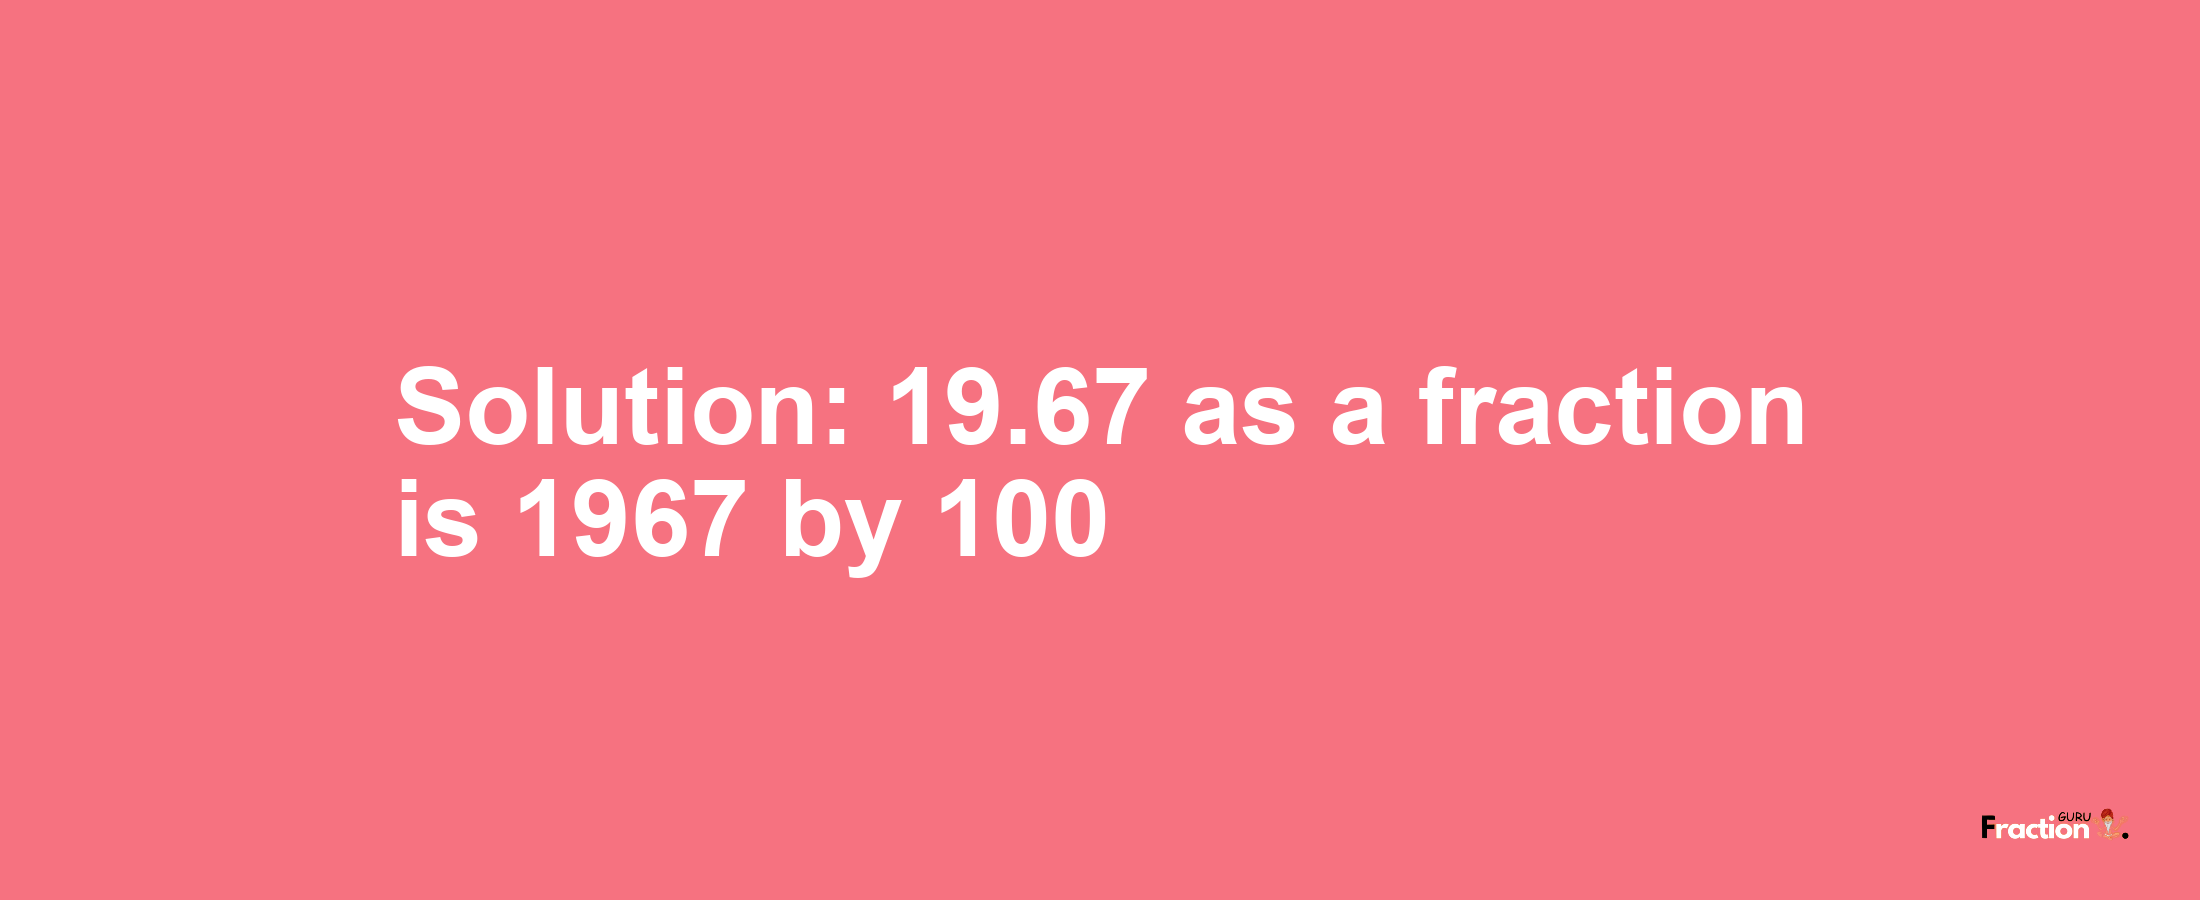 Solution:19.67 as a fraction is 1967/100